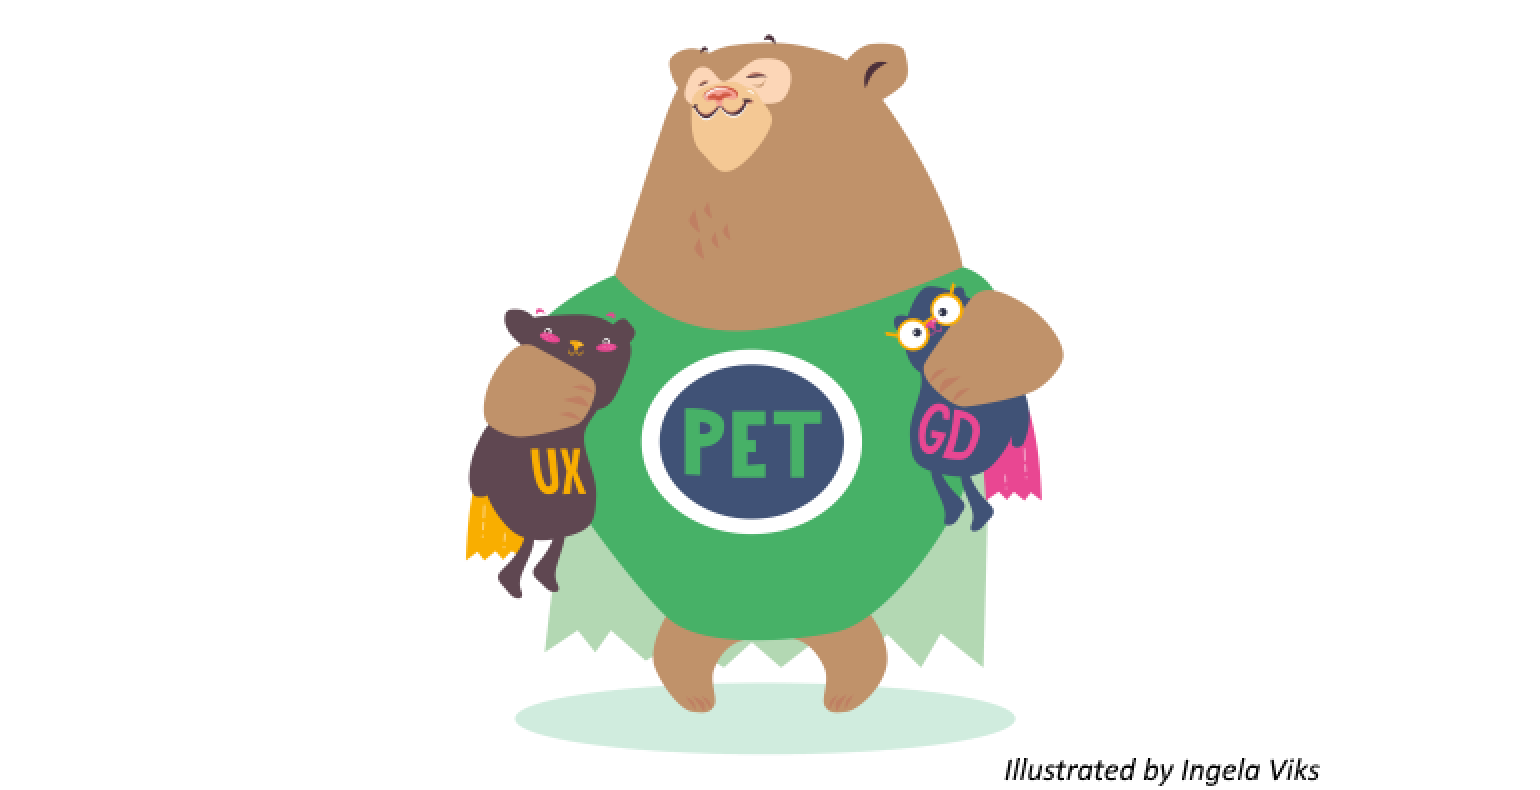 PET-design bear is hugging UX and Graphical Design